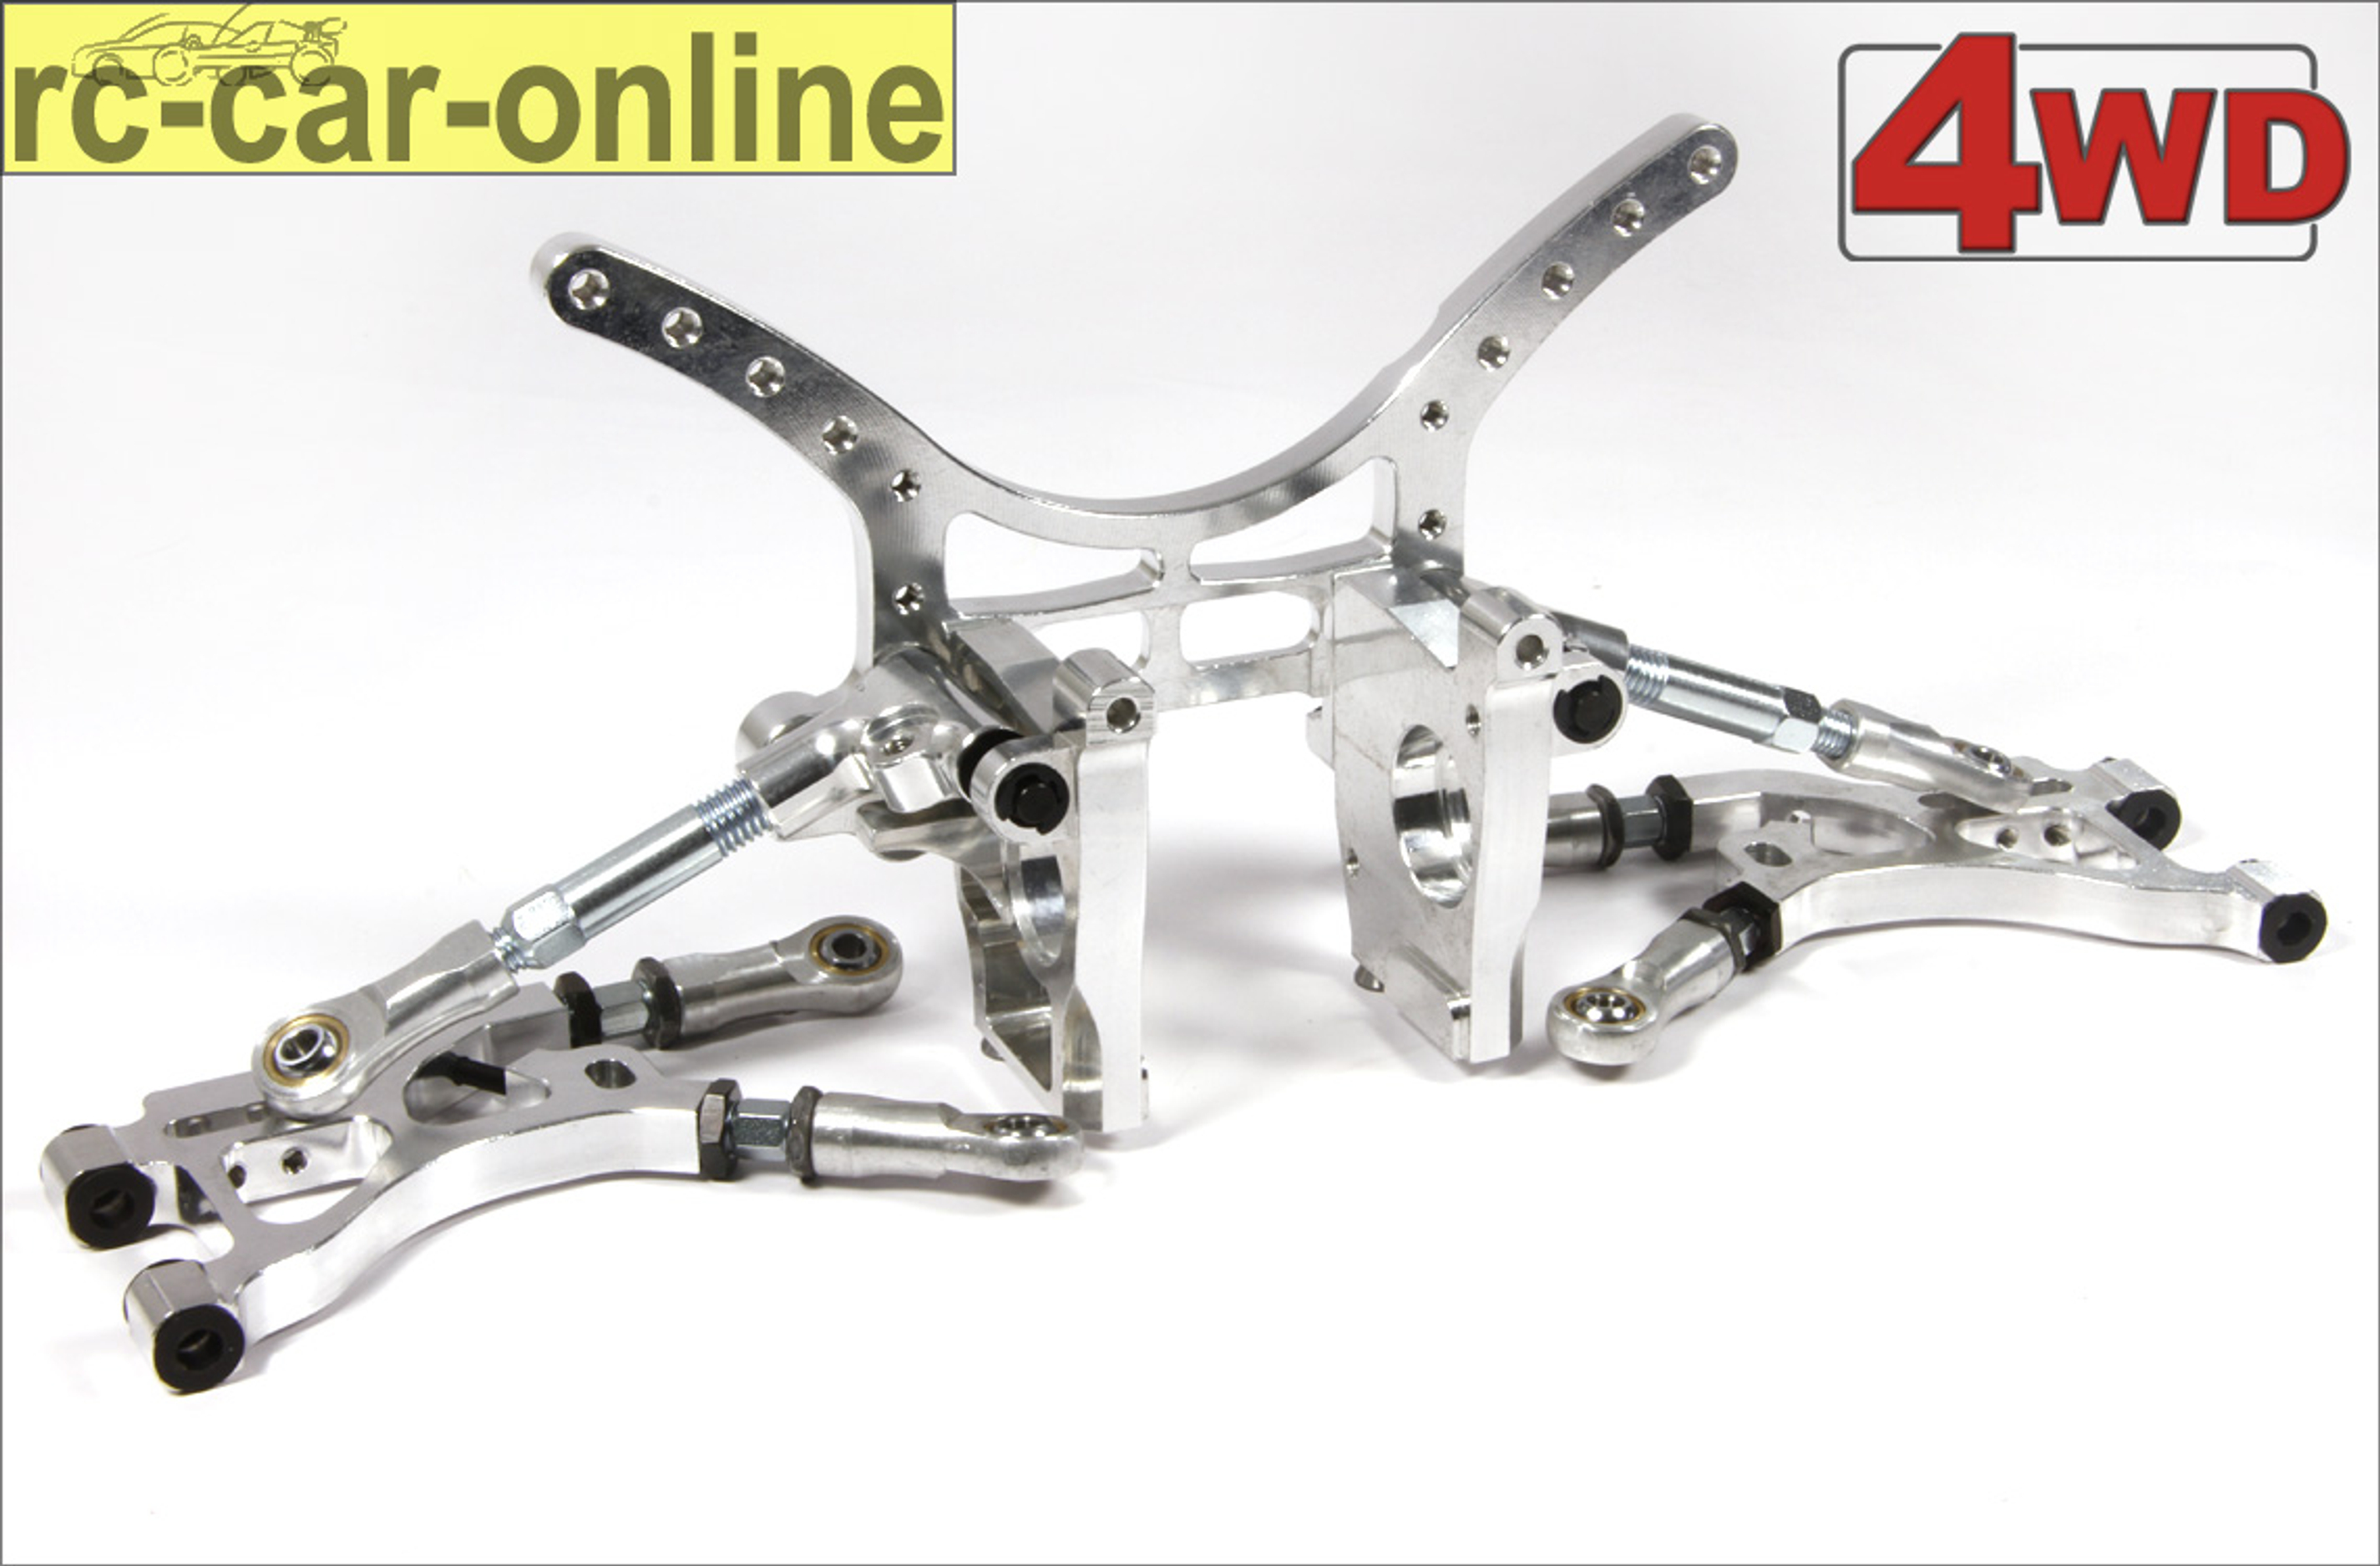 y2004 Tuning aluminum rear suspension set for nearly all FG 4WD Sportsline cars